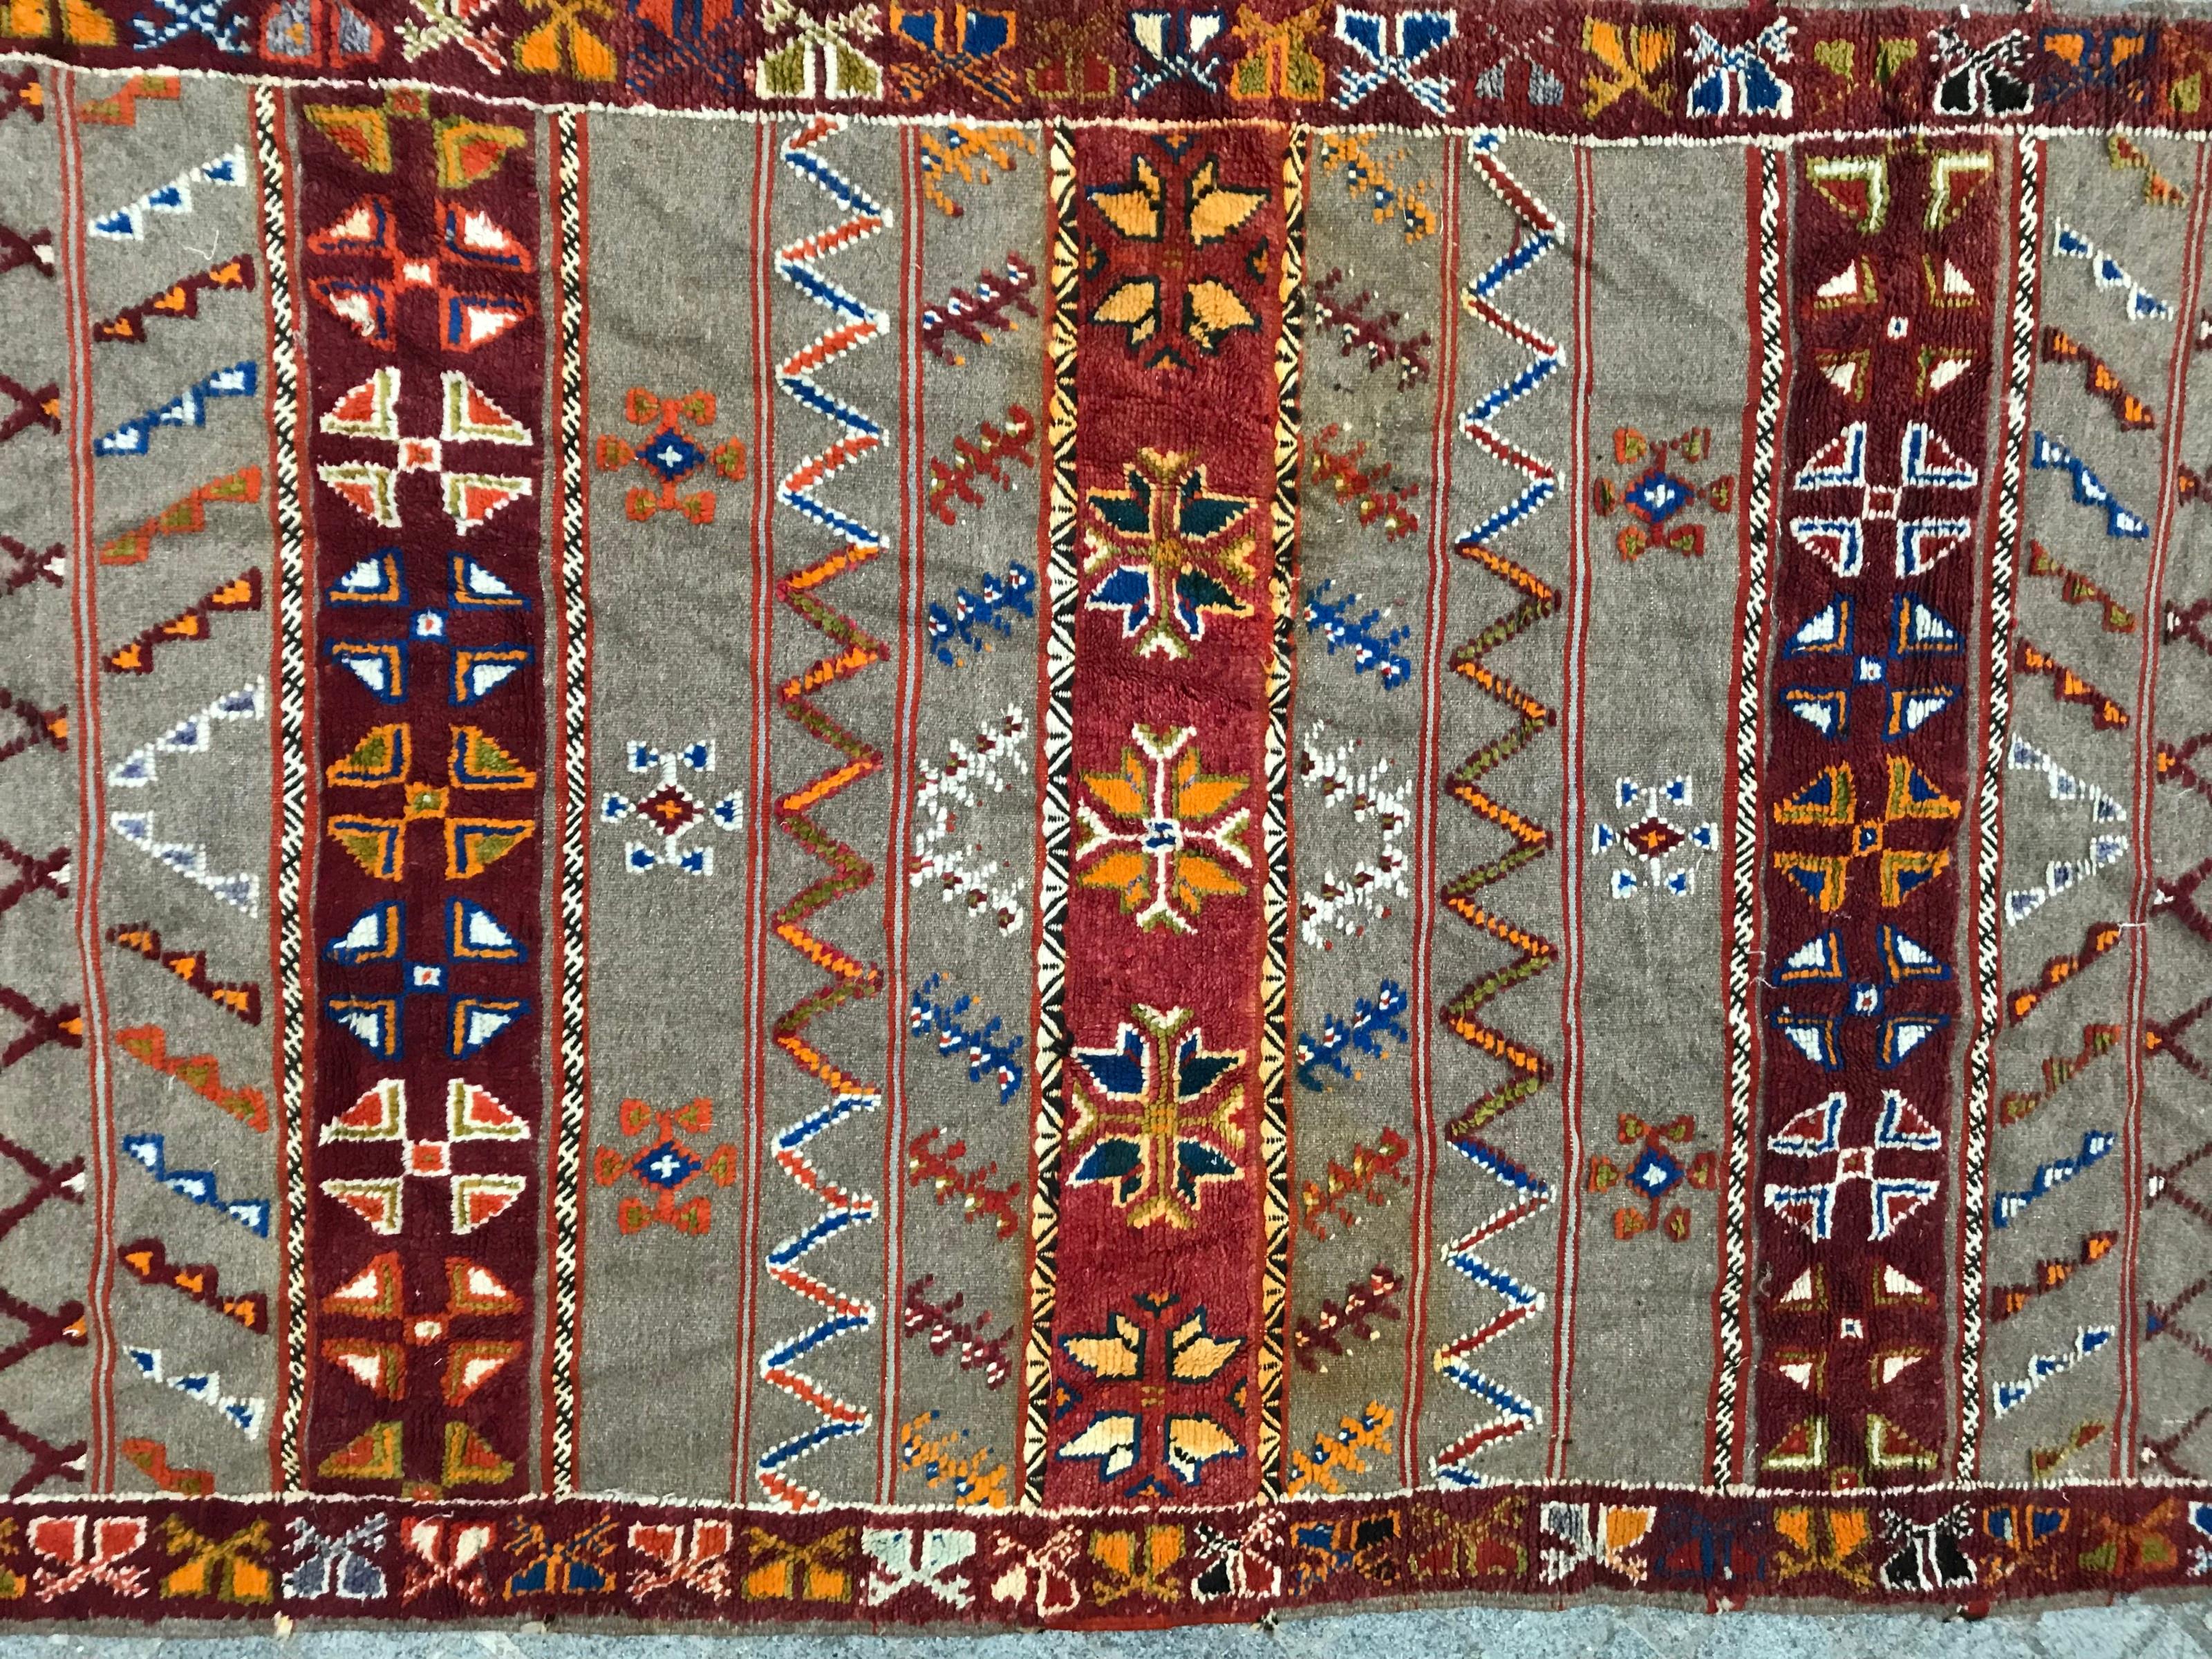 Beautiful 20th century Berbere Moroccan rug, some knotted with pile parts and some woven flat parts, with geometrical tribal design and nice colors
Wool velvet on cotton foundation. Measures: 4ft 8in x 8ft 4in.
  